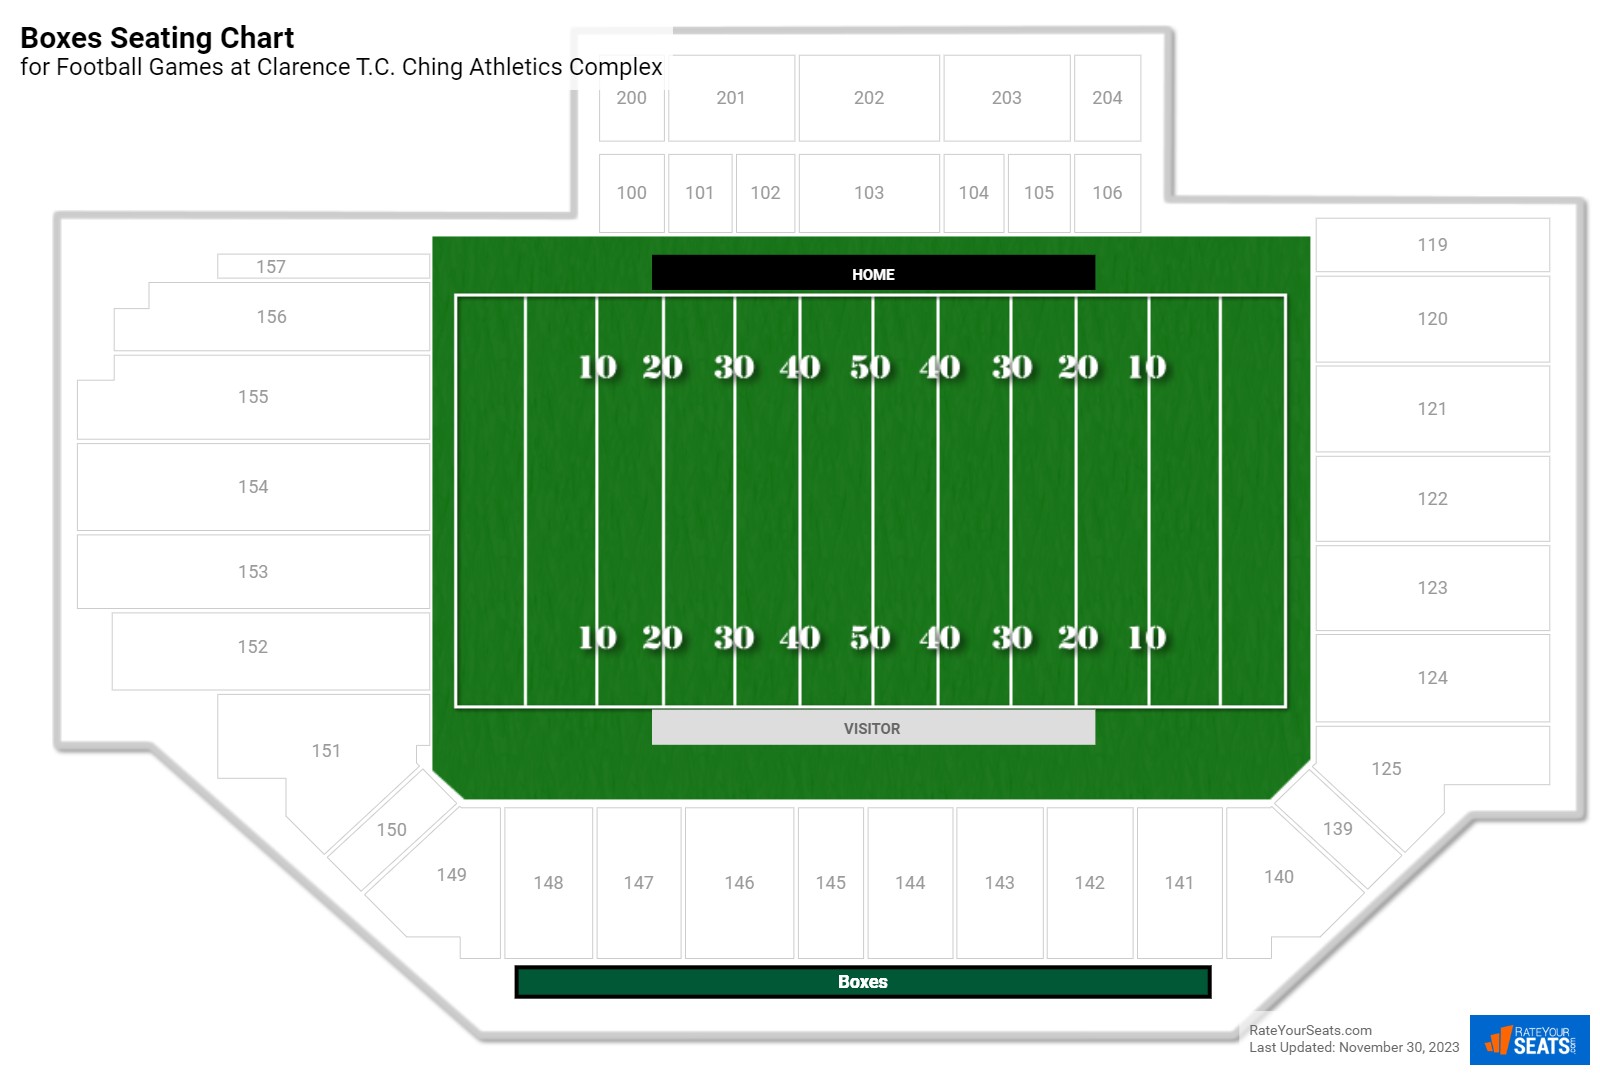 Football Boxes Seating Chart at Clarence T.C. Ching Athletics Complex